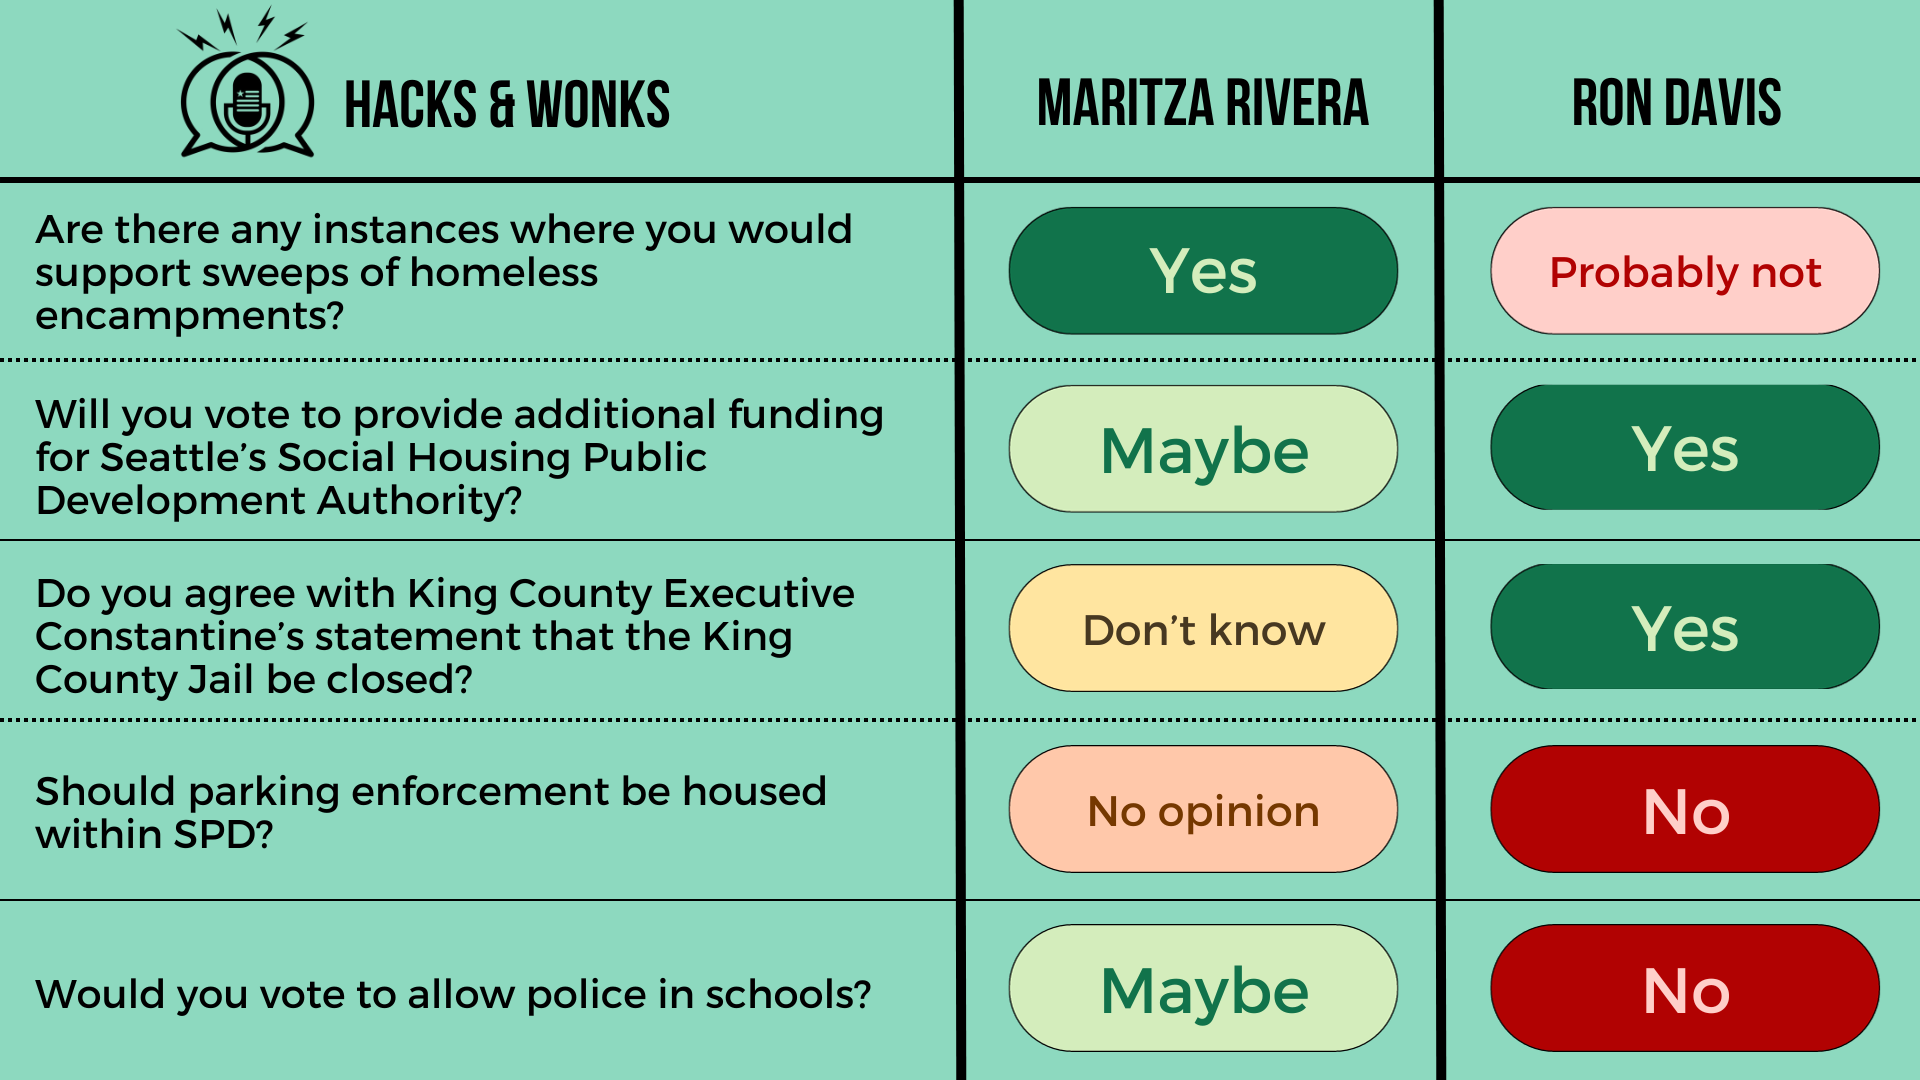 Q: Are there any instances where you would support sweeps of homeless encampments? Maritza Rivera: Yes, Ron Davis: Probably not  Q: Will you vote to provide additional funding for Seattle’s Social Housing Public Development Authority? Maritza Rivera: